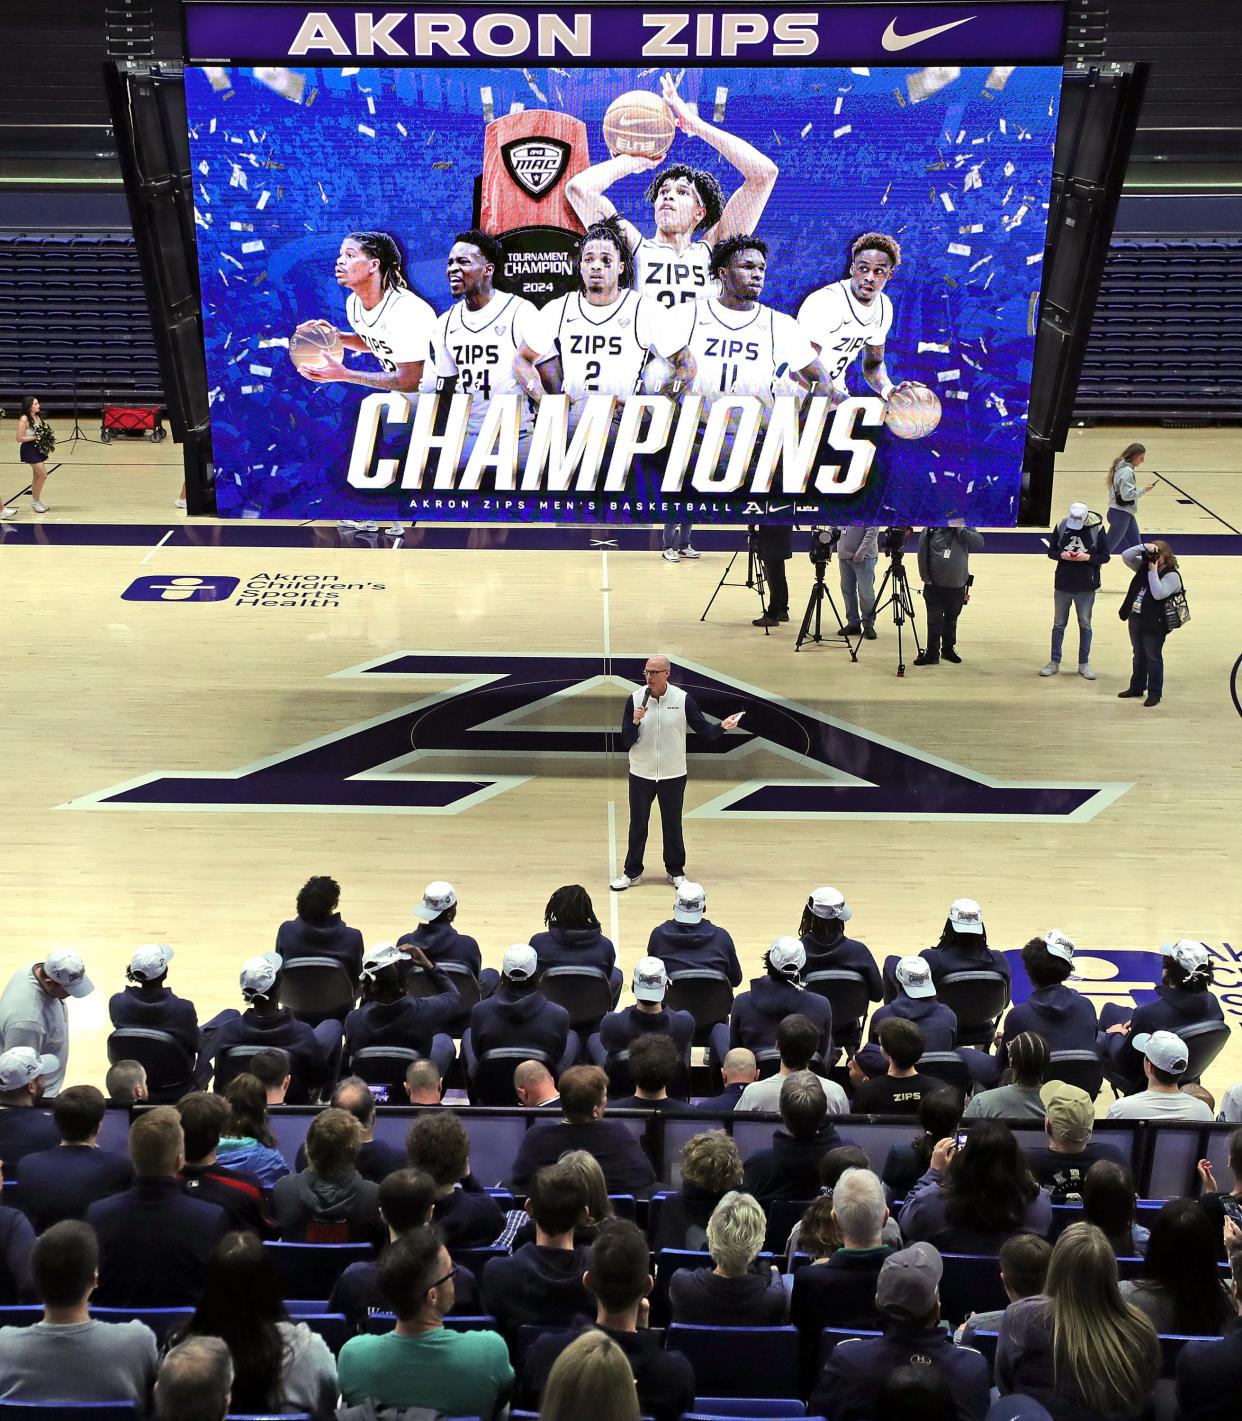 Akron coach John Groce speaks to his team and a small group of fans during the Zips' watch party for the NCAA Tournament Selection Show on Sunday in Akron.